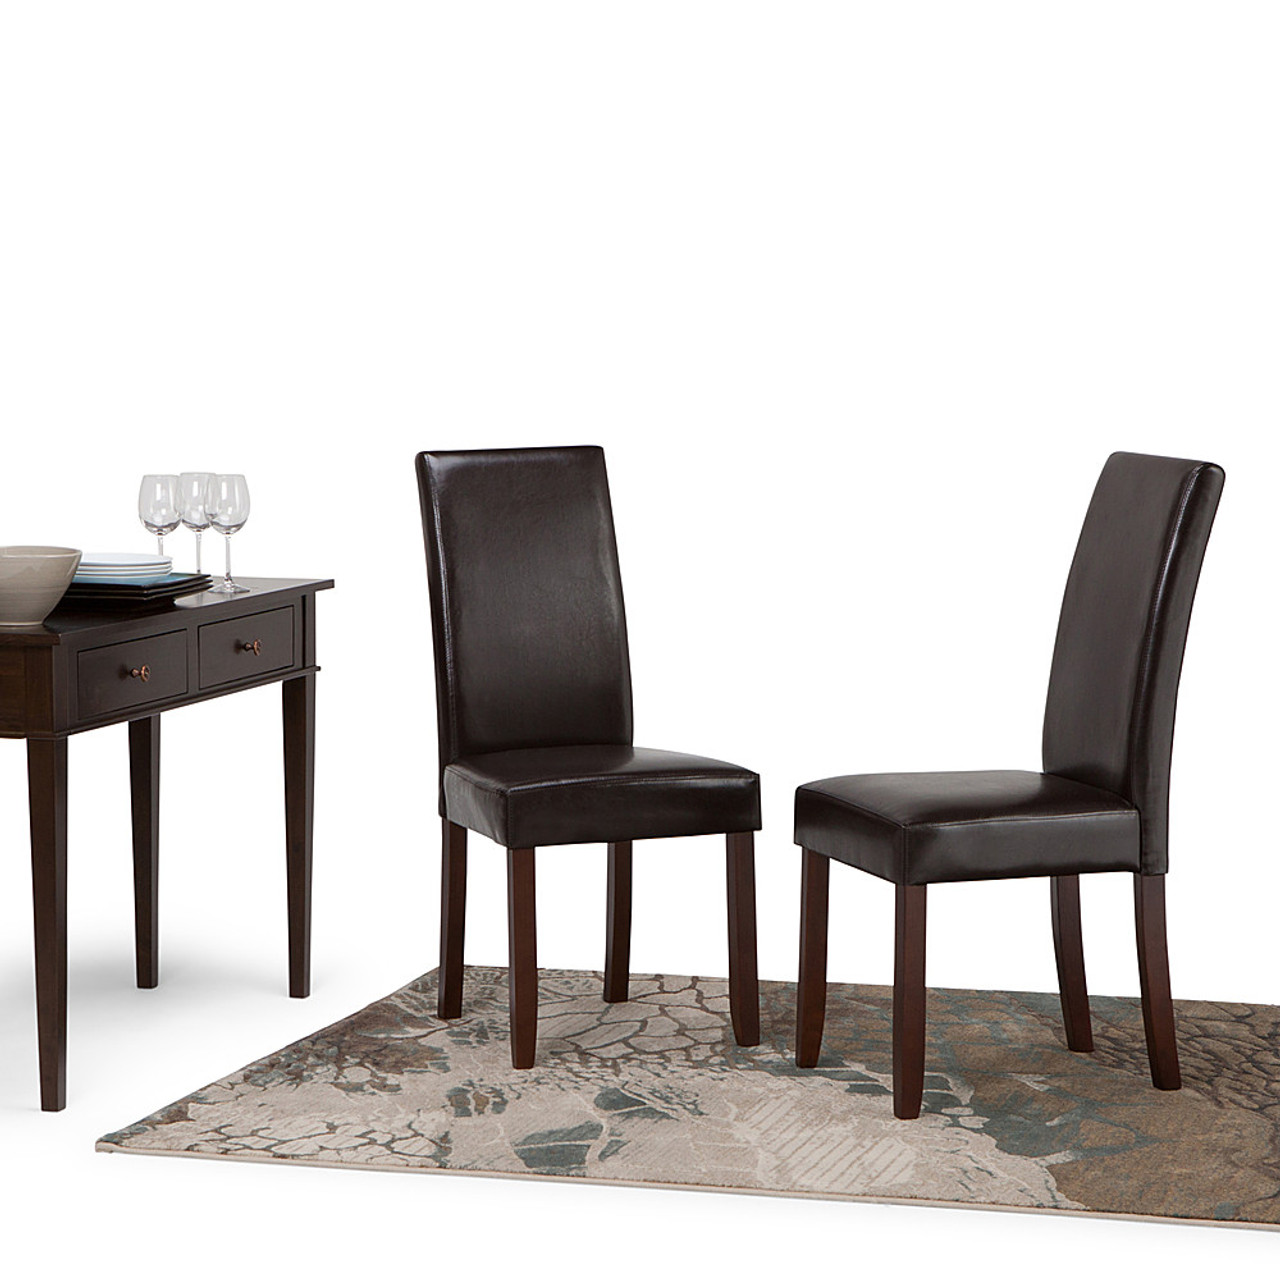 Simpli Home - Acadian Parson Polyurethane Faux Leather Dining Chairs (Set of 2) - Tanner's Brown